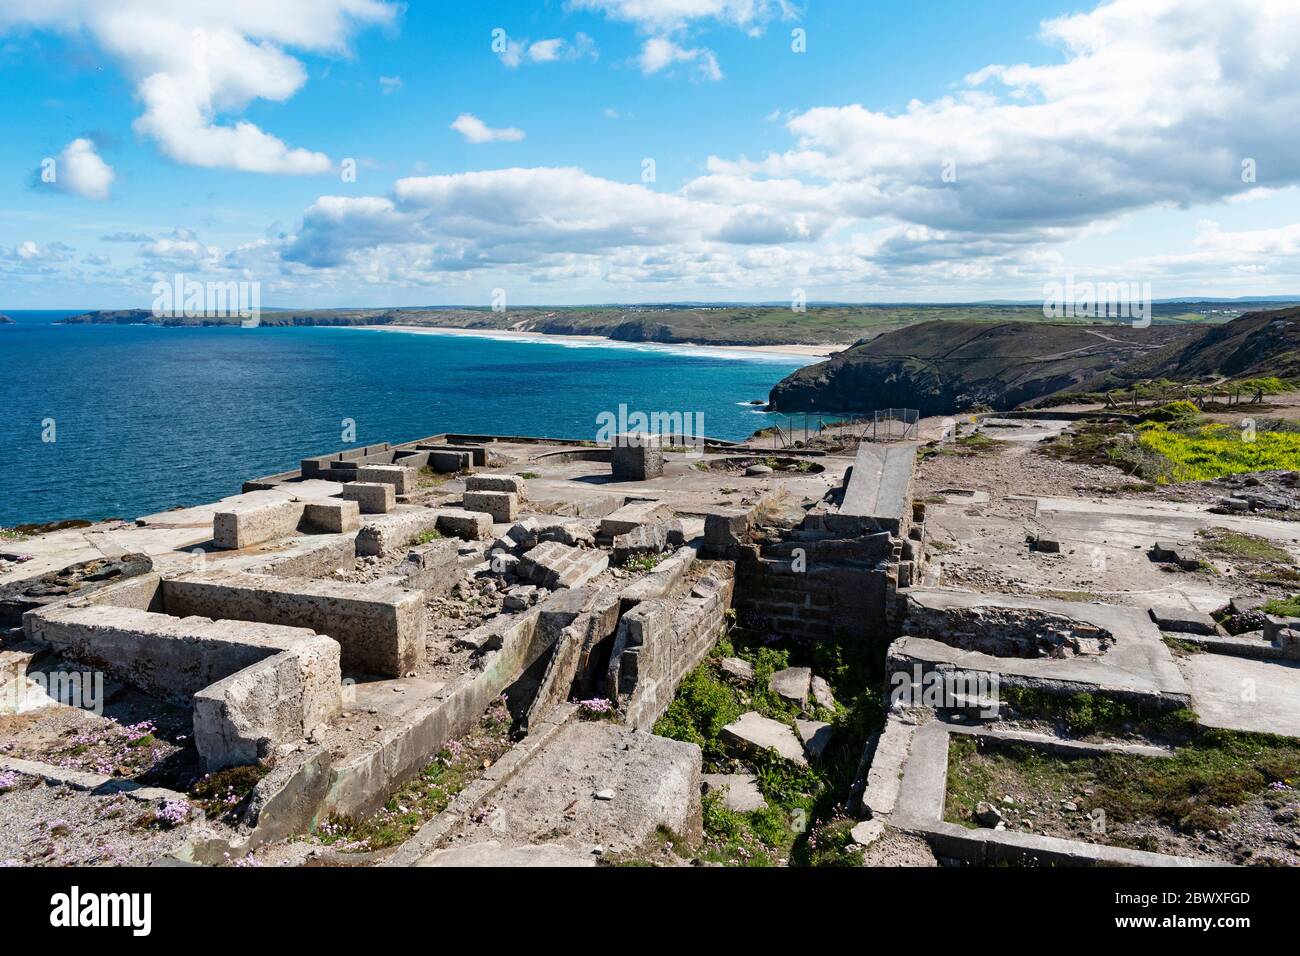 The old Cligga wolfram mine and nobels munitions factory  near Perranporth in Cornwall, England, UK. Stock Photo